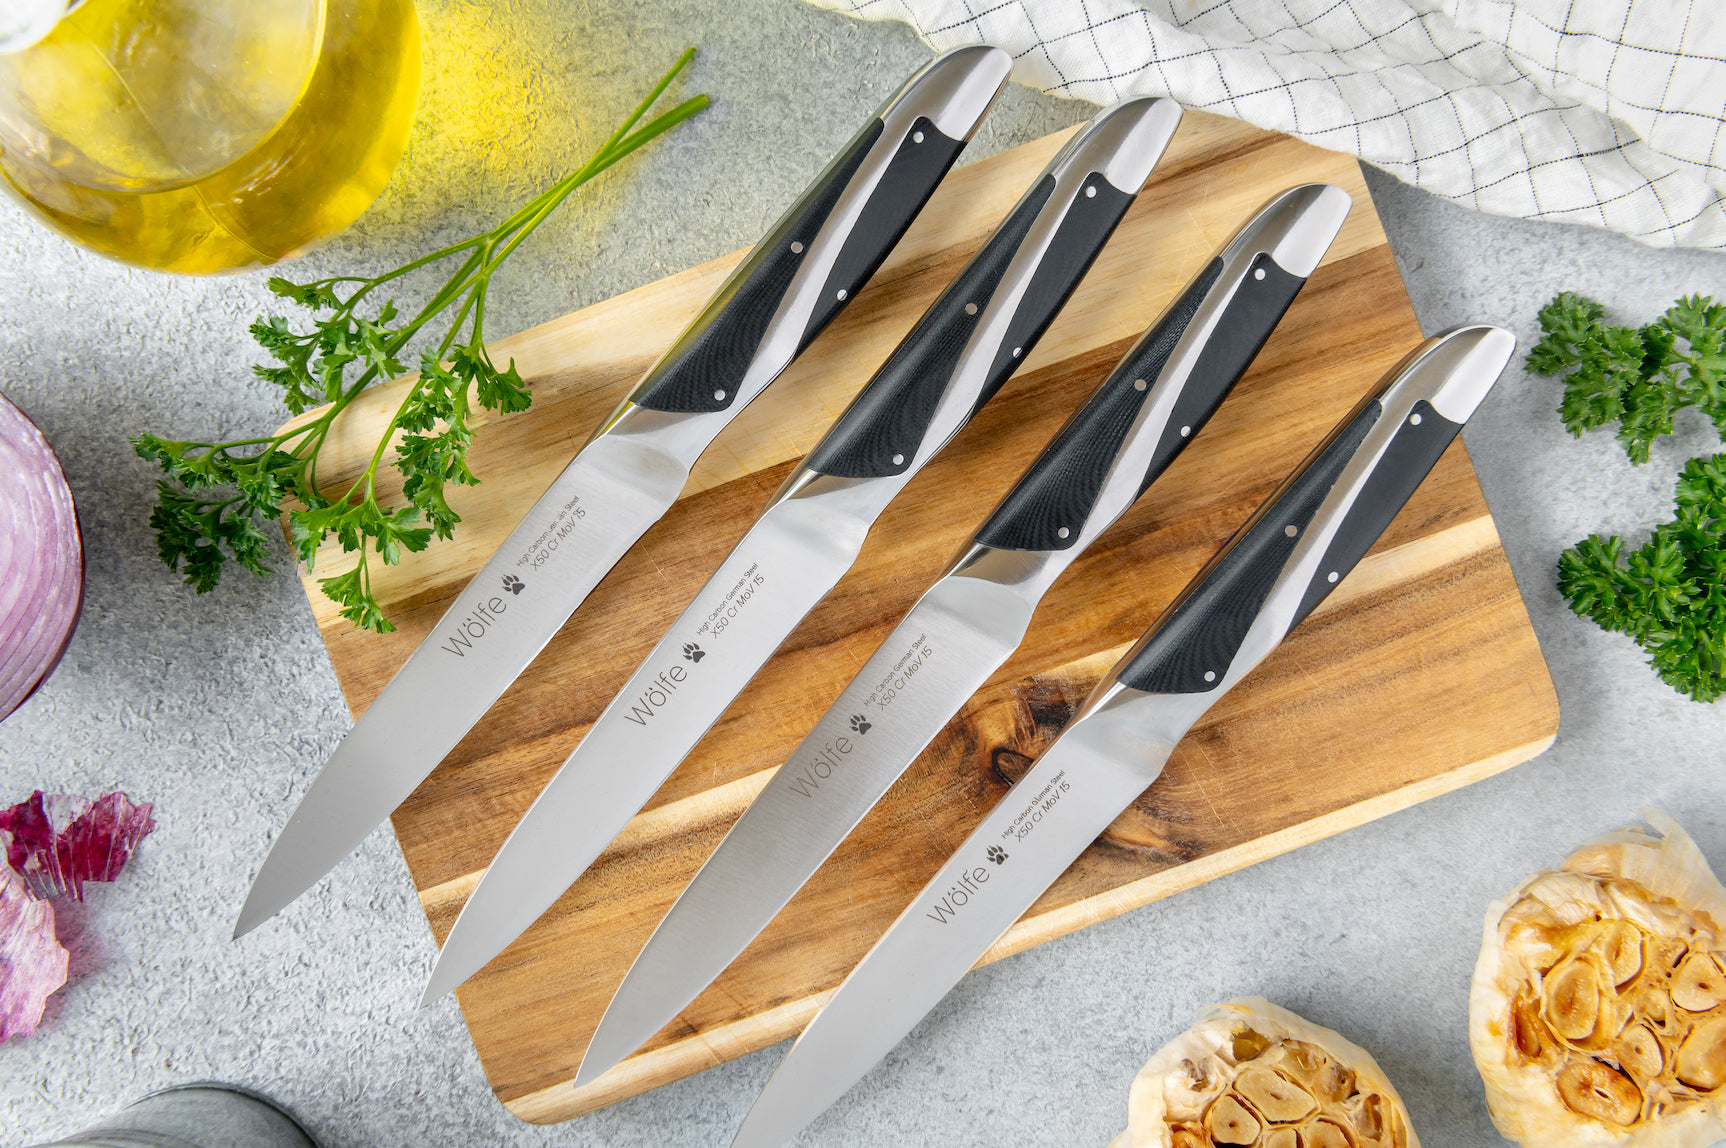 Umite Chef 48-Piece Silverware Set with Steak Knives India